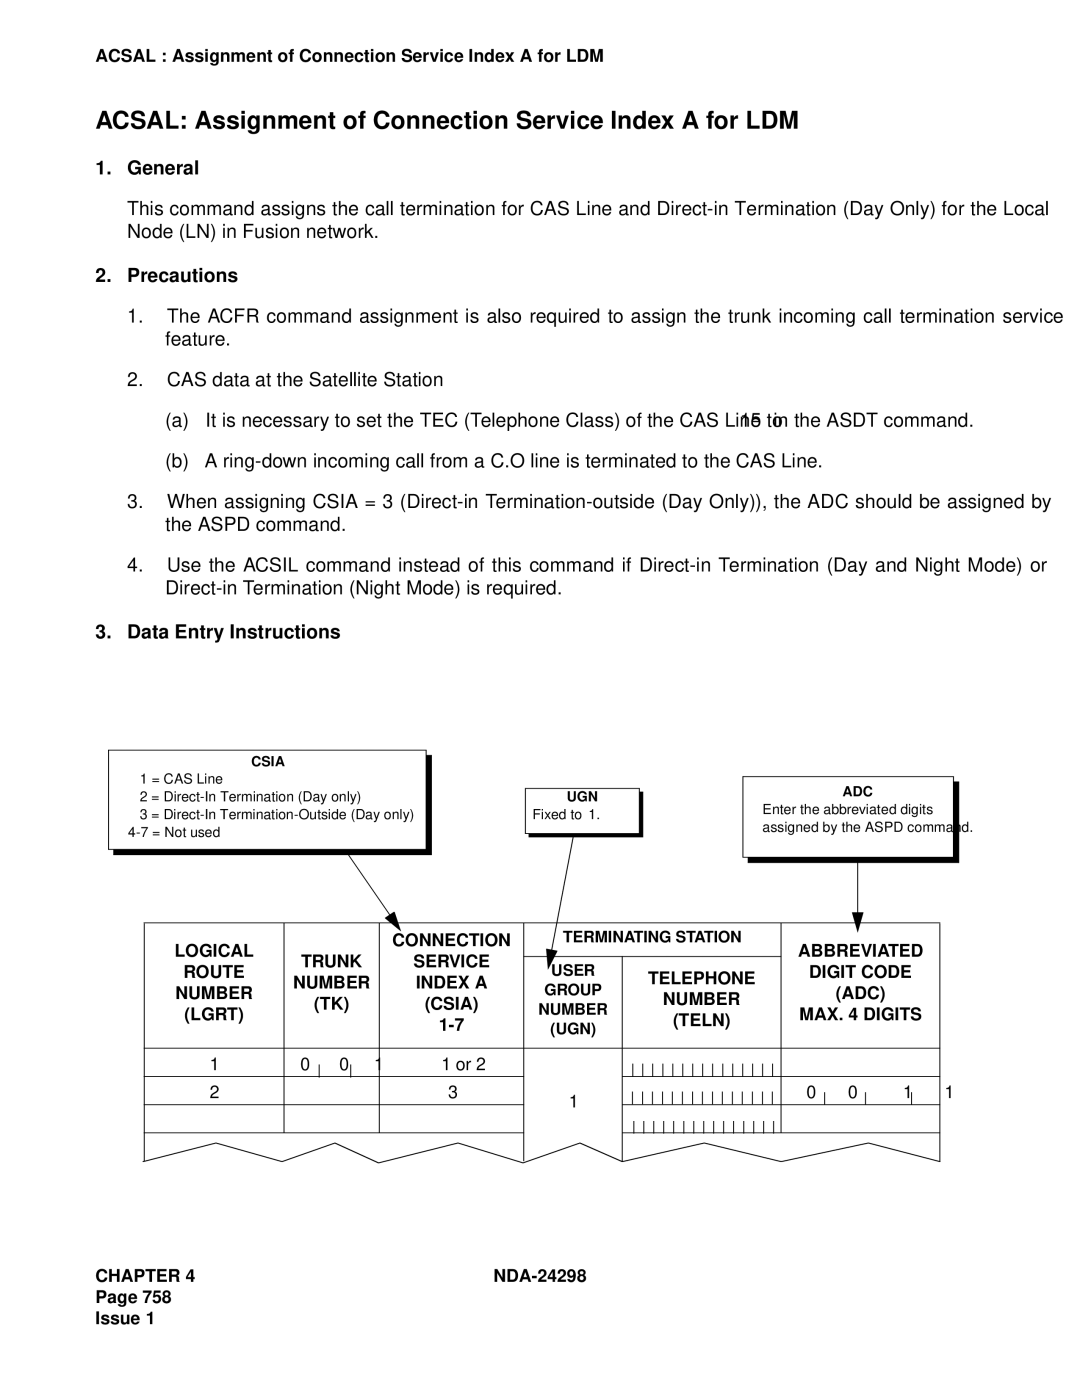 NEC NDA-24298 manual Acsal Assignment of Connection Service Index a for LDM 